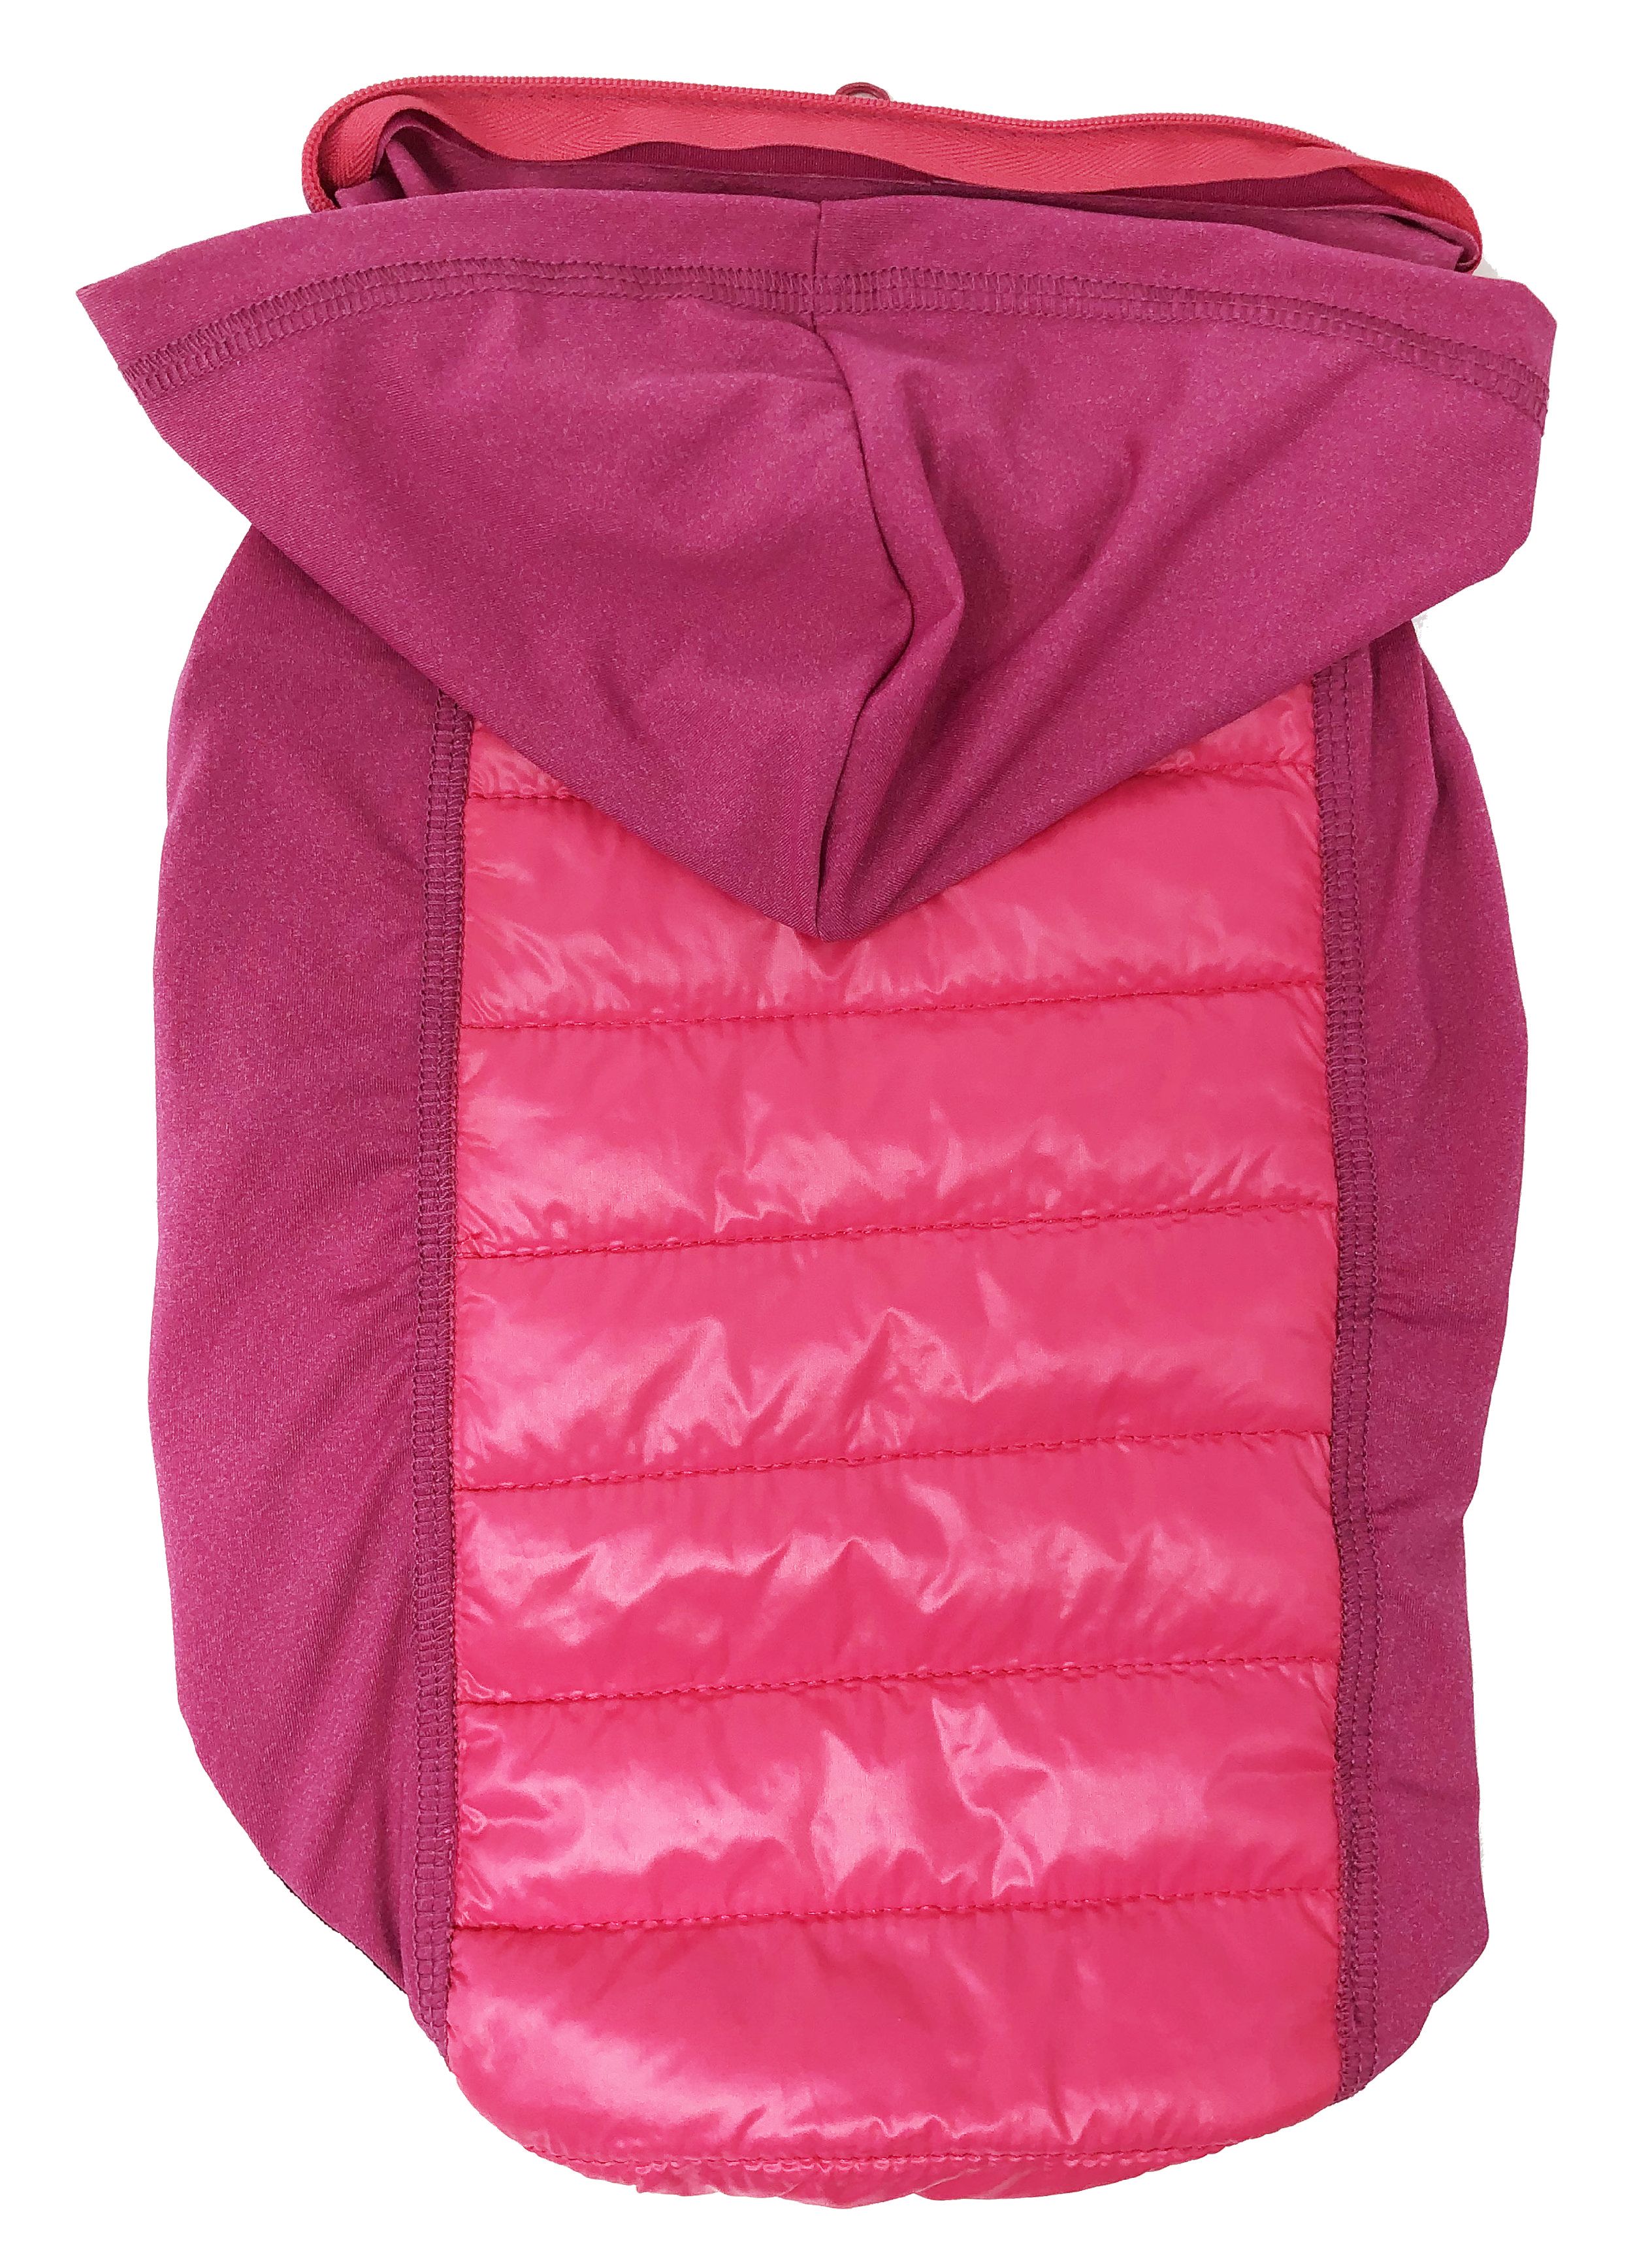 Pet Life ® 'Apex' Lightweight Hybrid 4-Season Stretch and Quick-Dry Dog Coat w/ Pop out Hood Pink X-Small